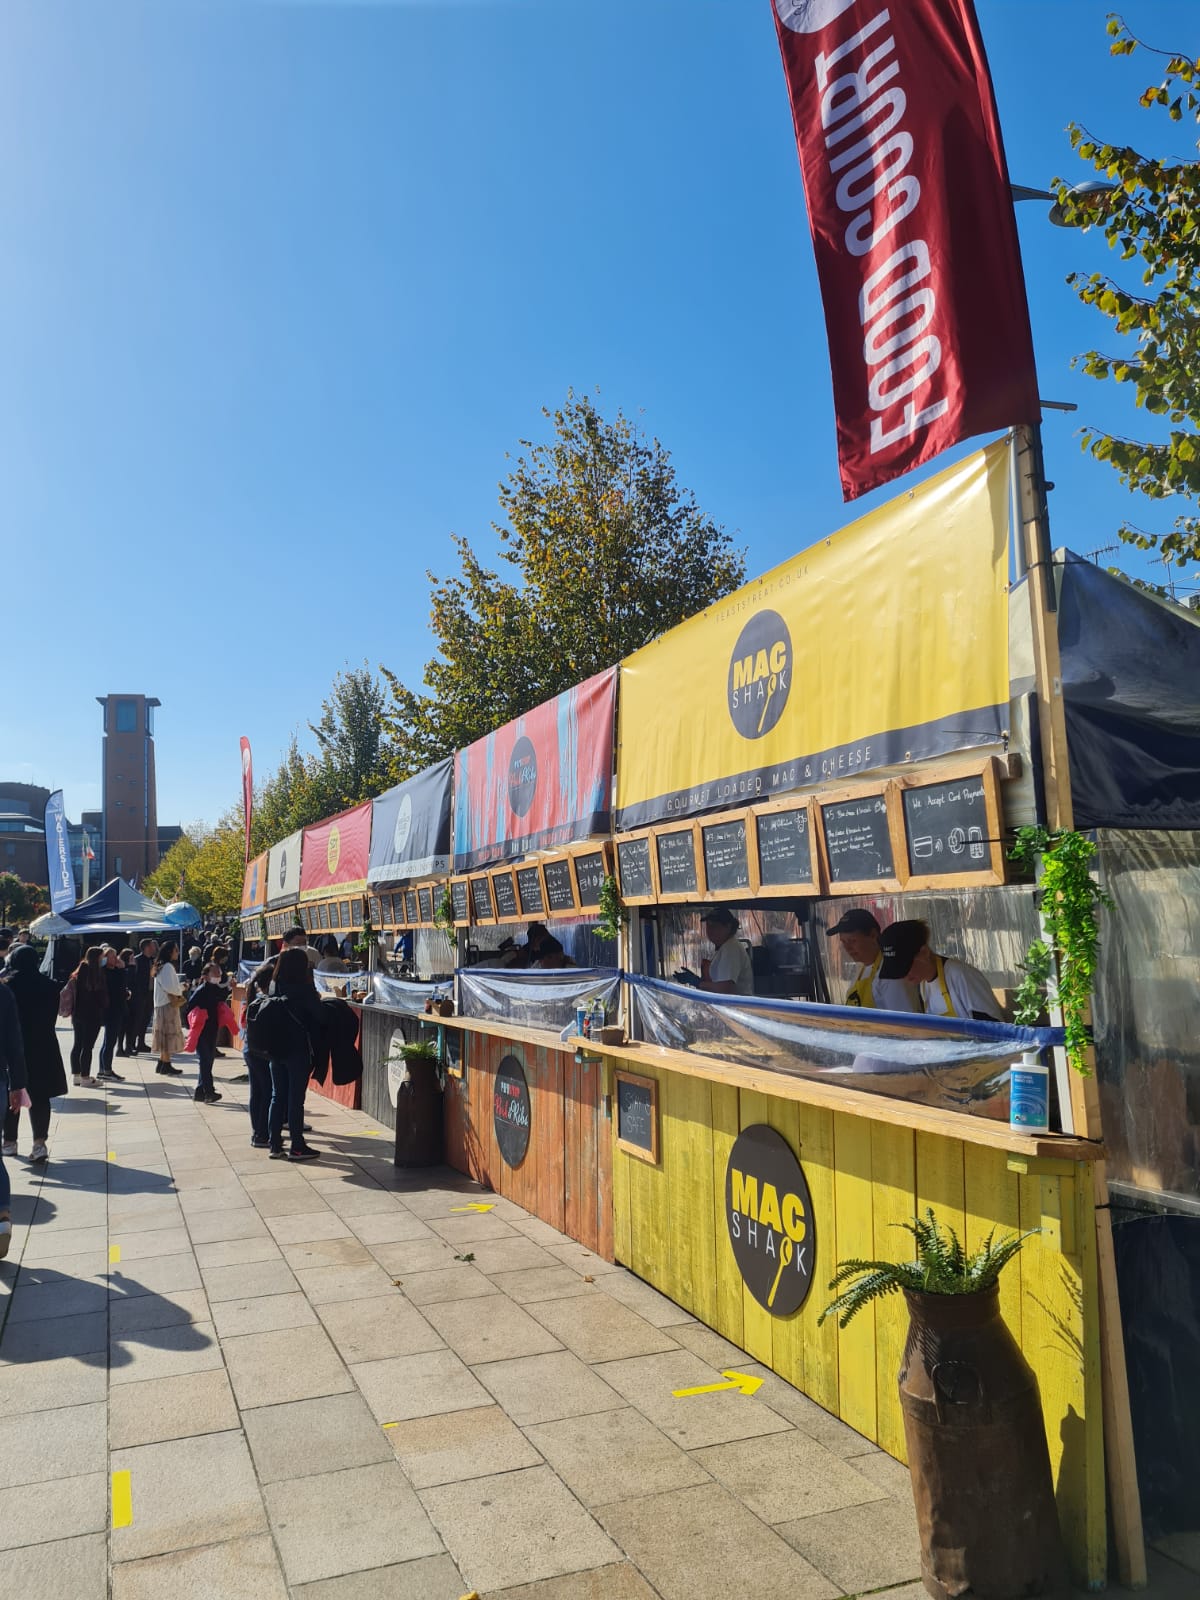 Food Festival at Great British Motor Shows with Artisan Street Food from Feast Streat